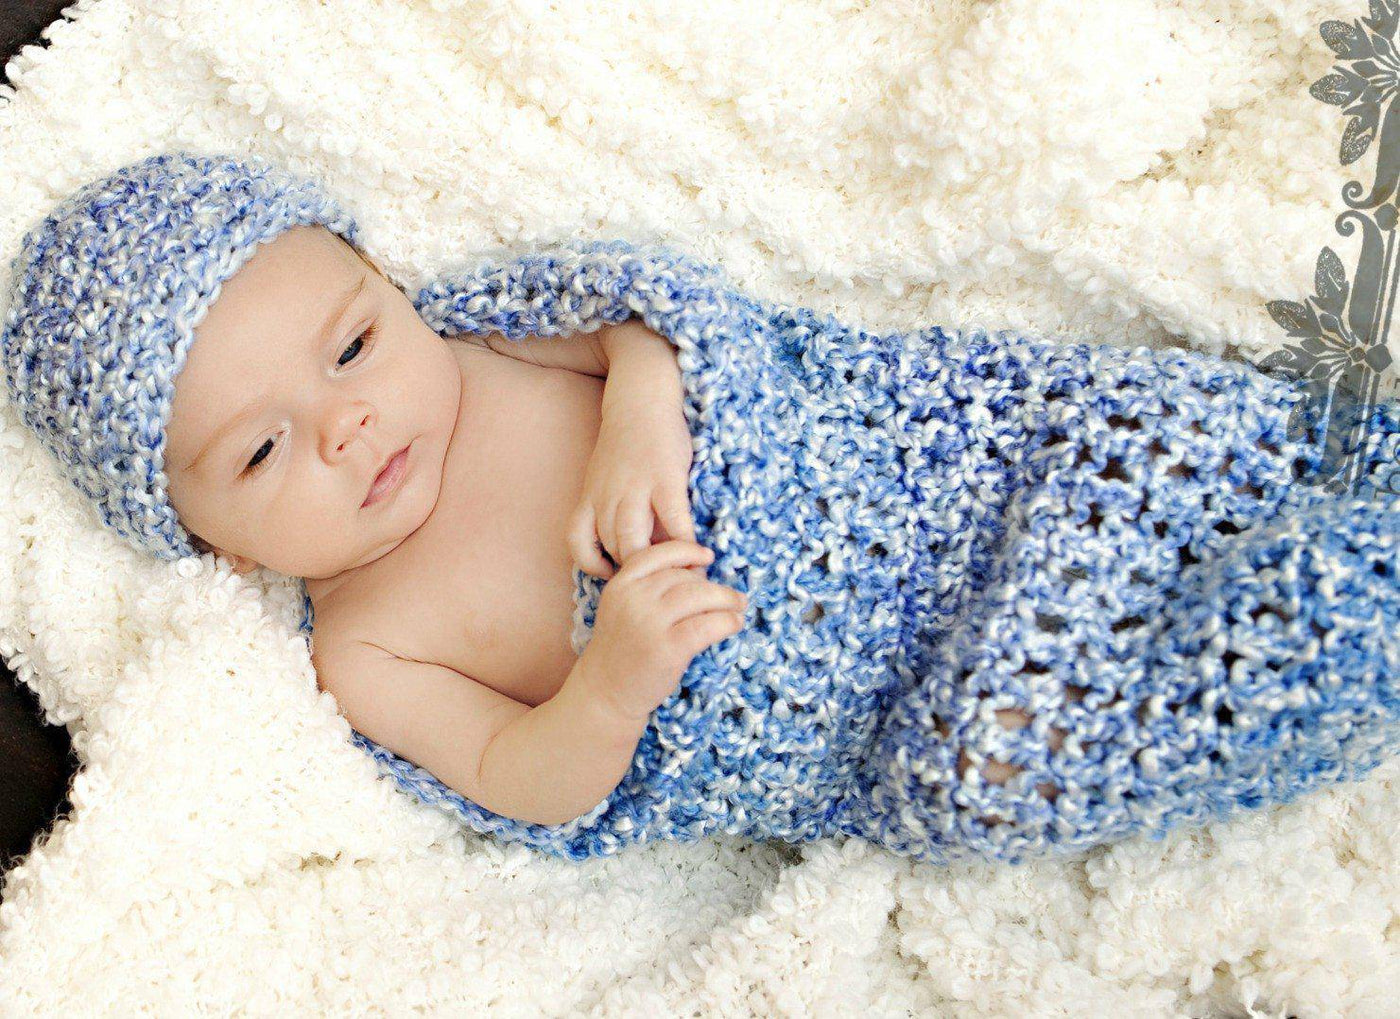 Blue Skies Baby Hat And Cocoon Set - Beautiful Photo Props